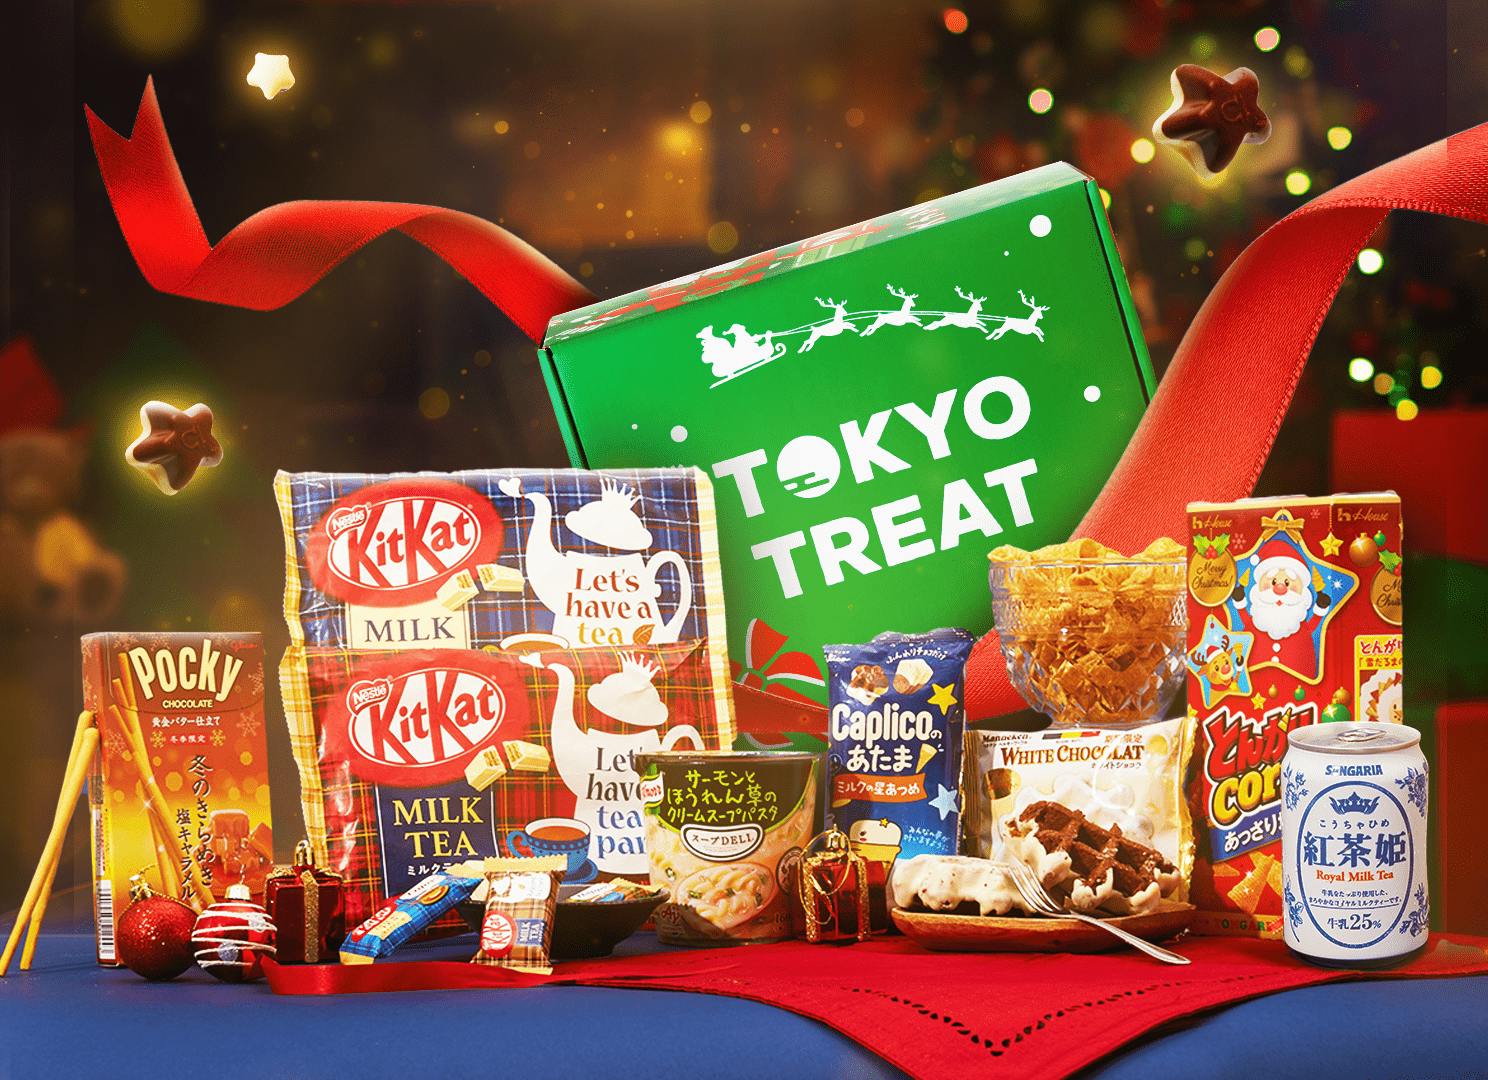 Japanese snacks and treats that come in the TokyoTreat subscription box